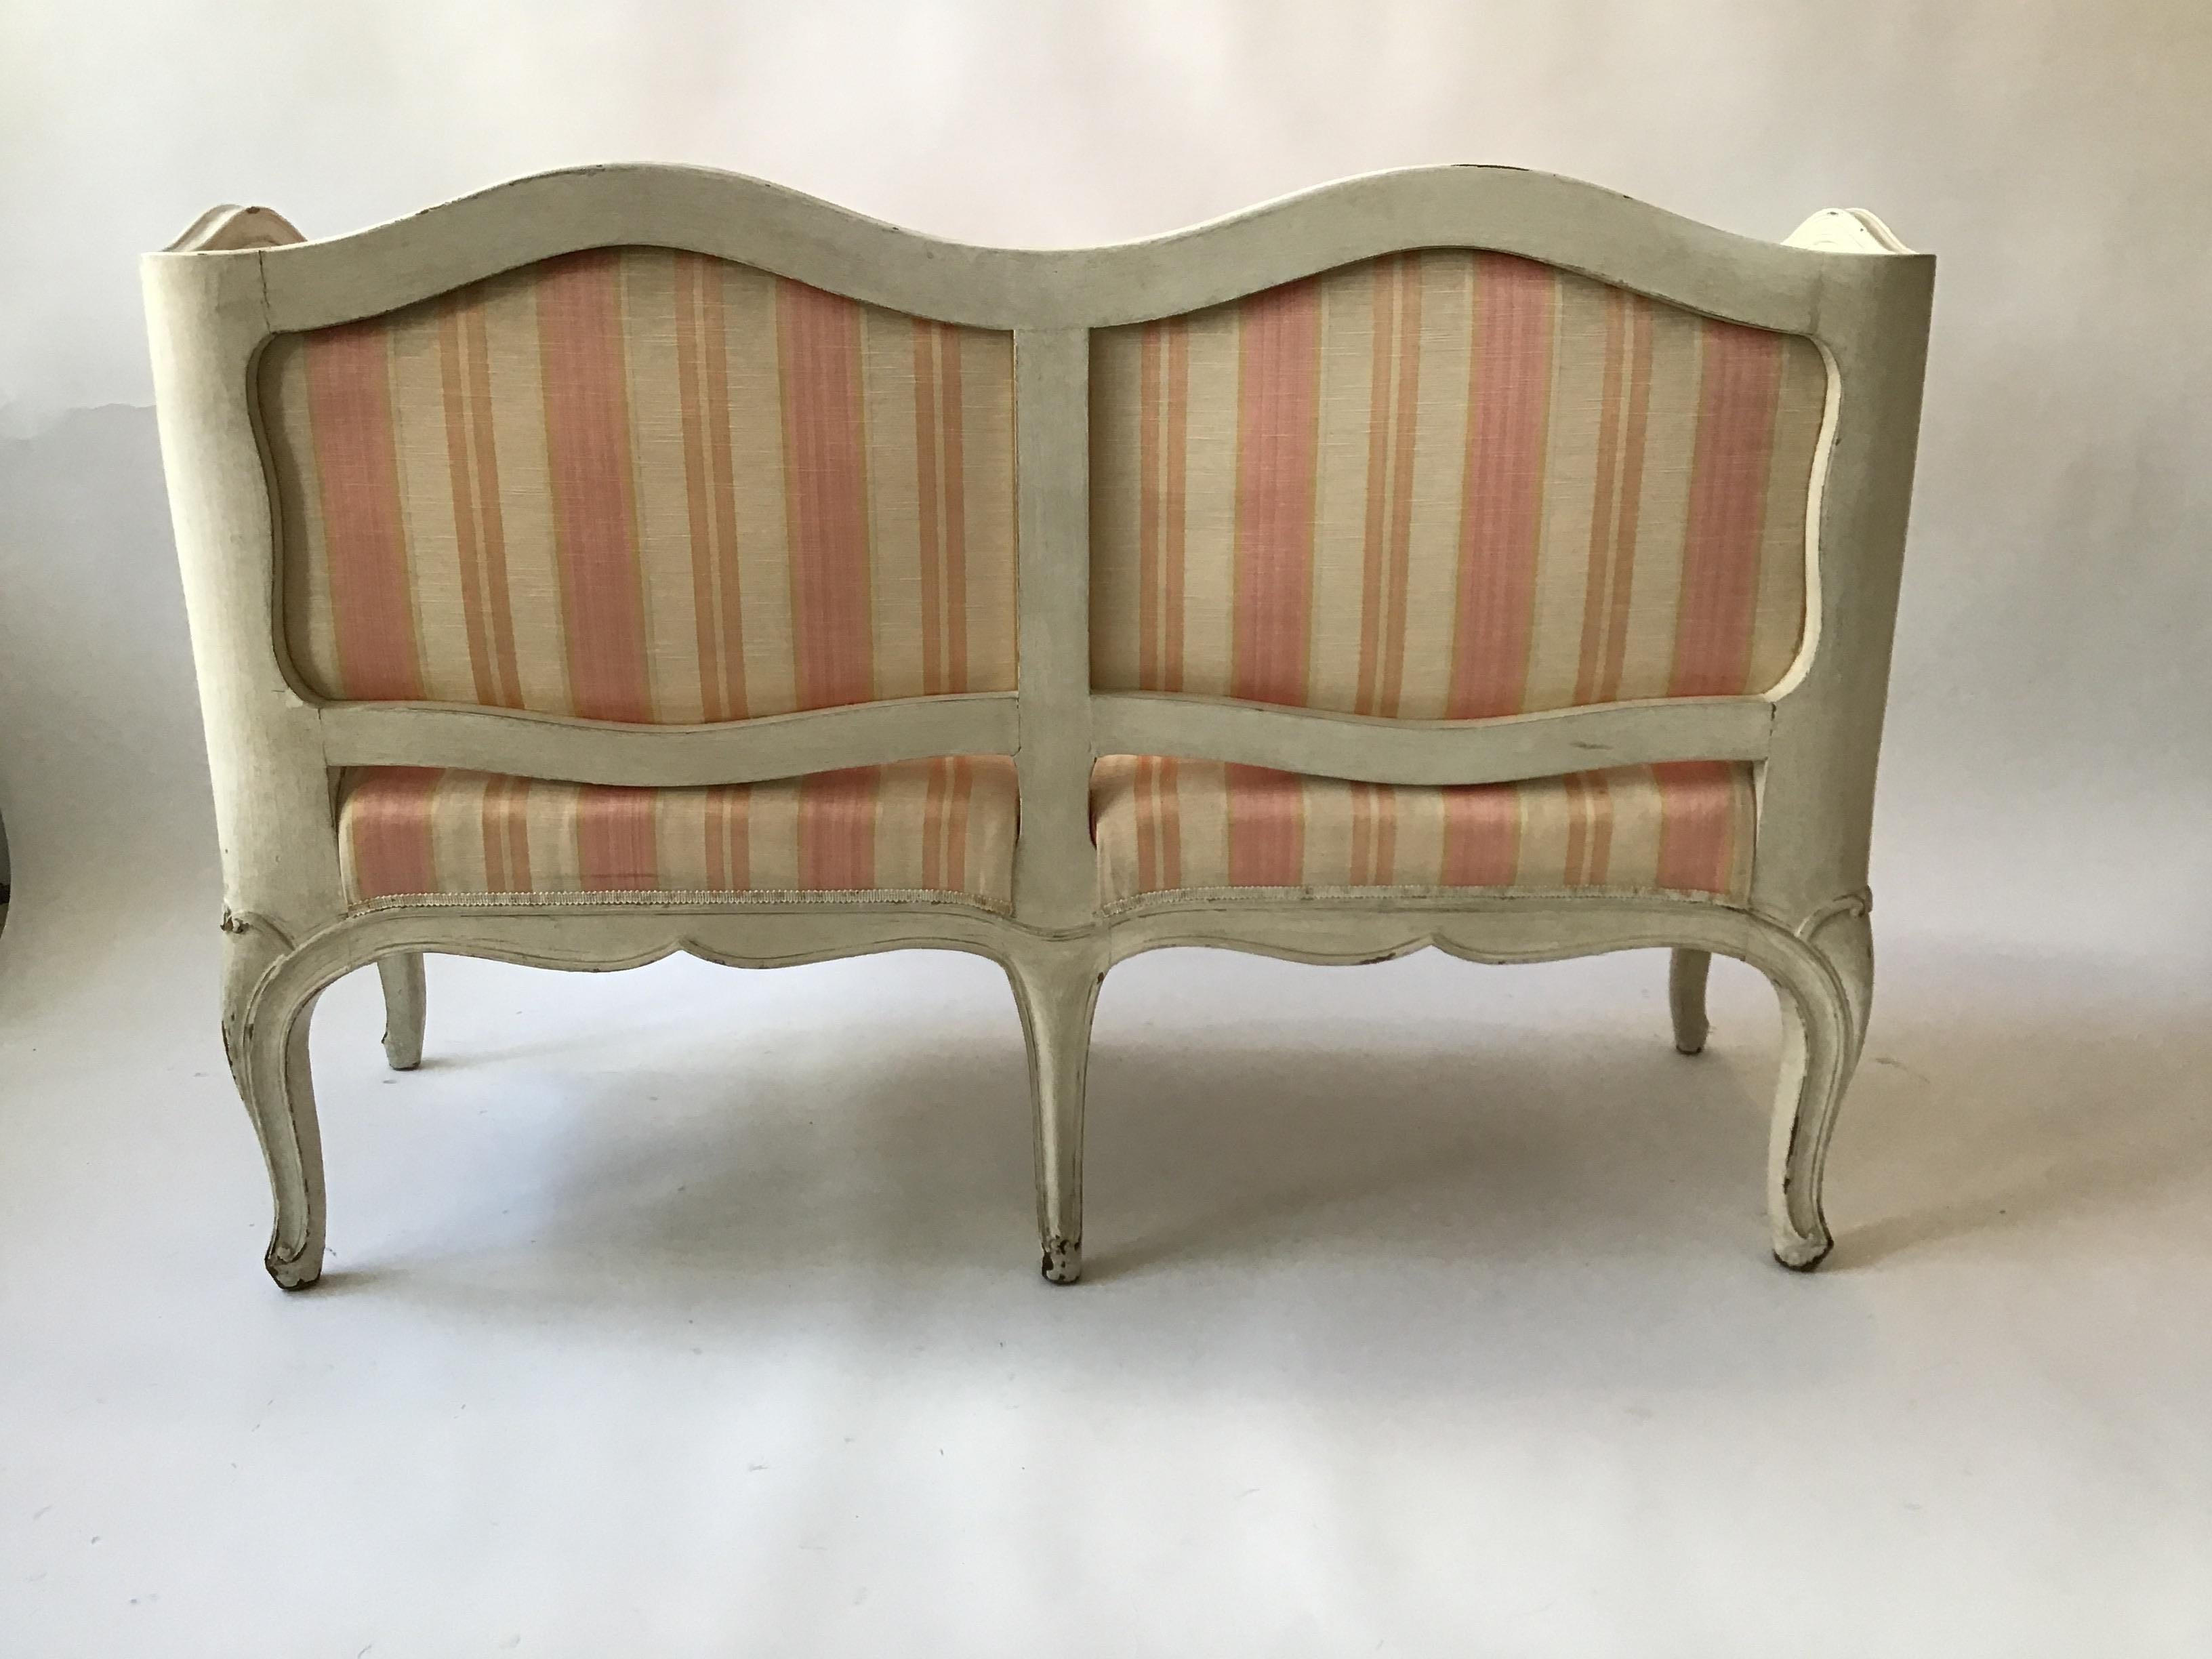 1960s French Style Louis XV High Sided Bench / Settee In Good Condition For Sale In Tarrytown, NY